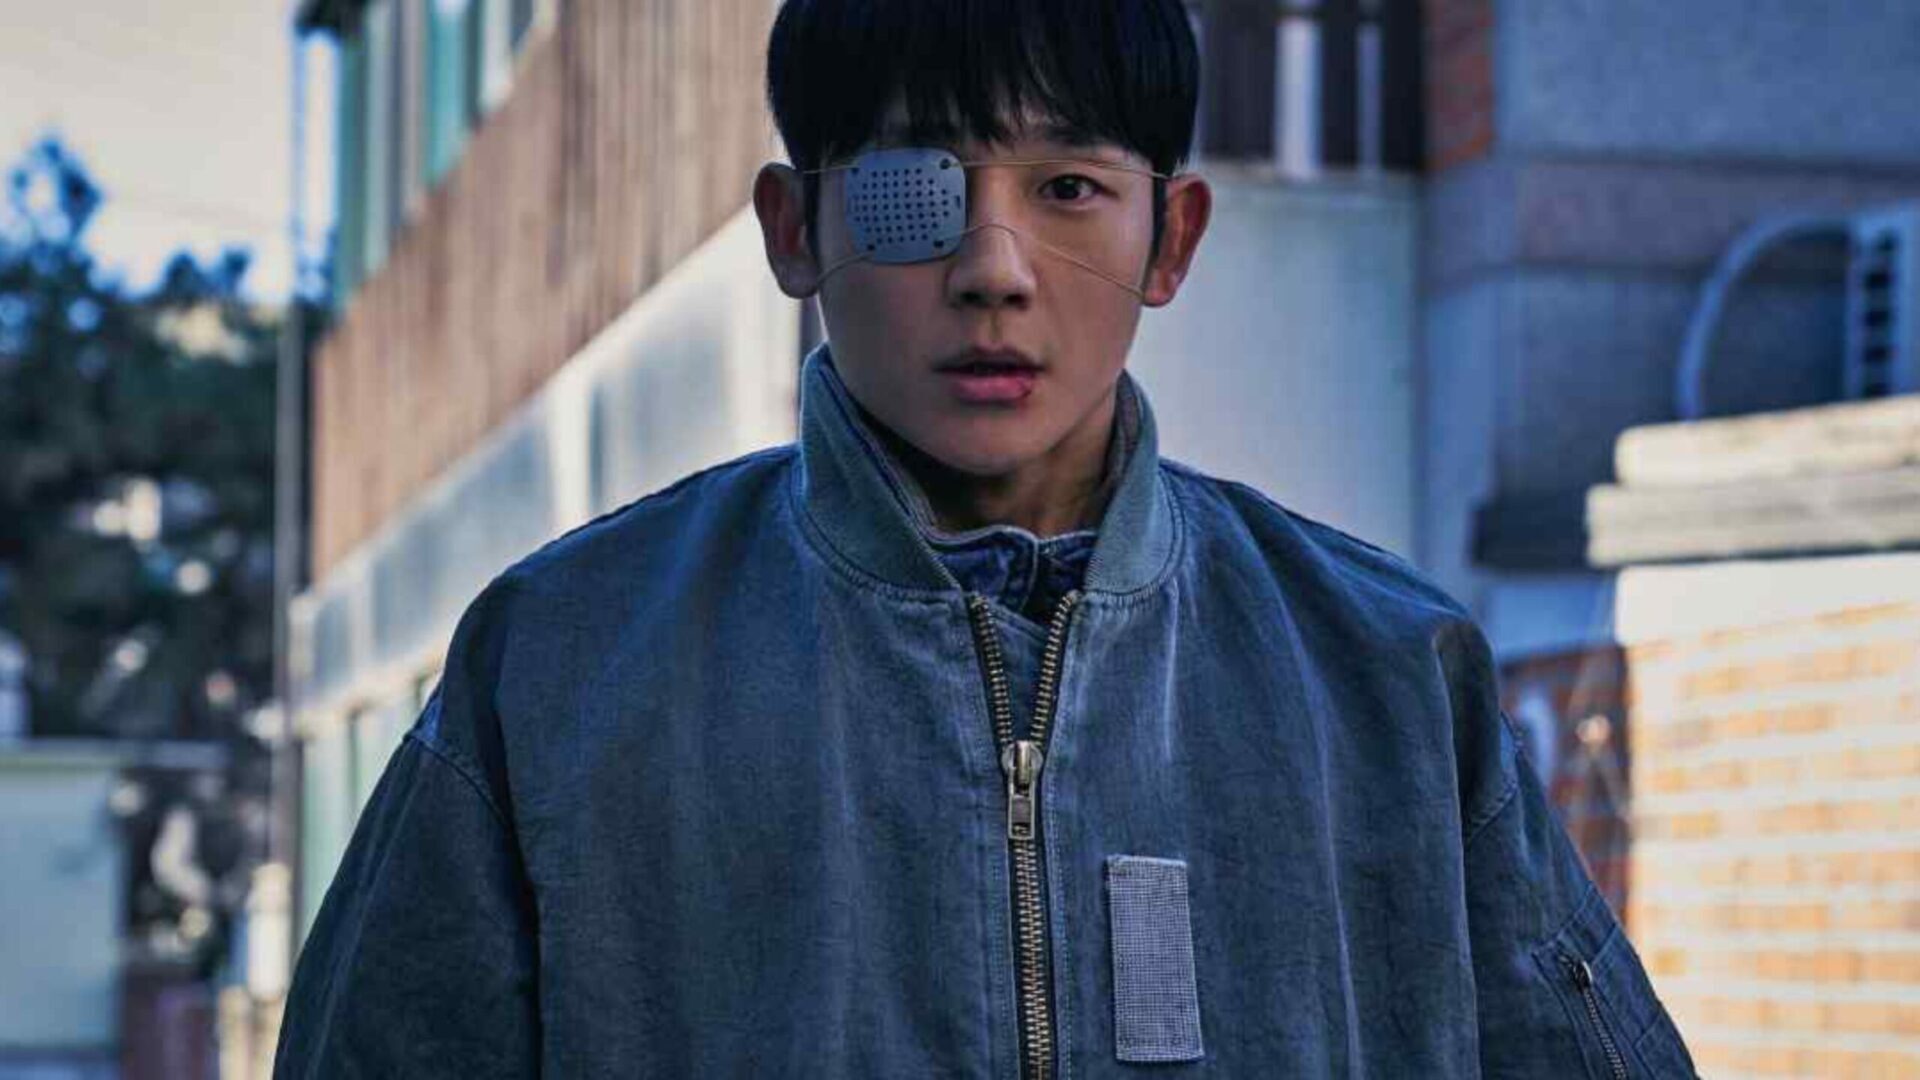 Jung Hae In in connect